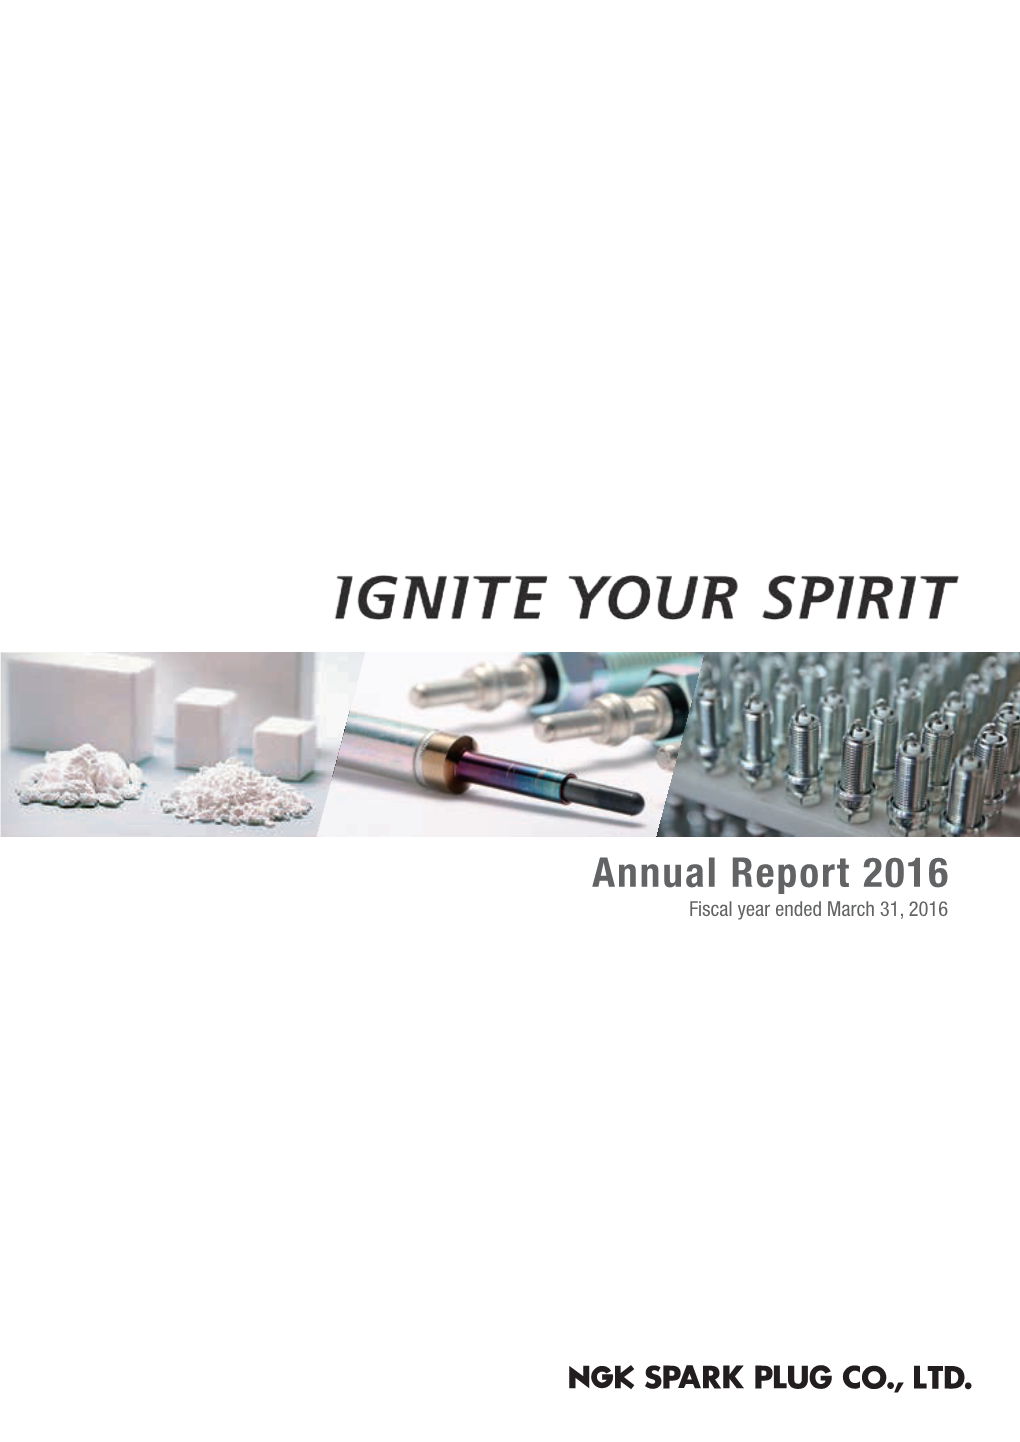 Annual Report 2016 005 0653701372808.Indd 3